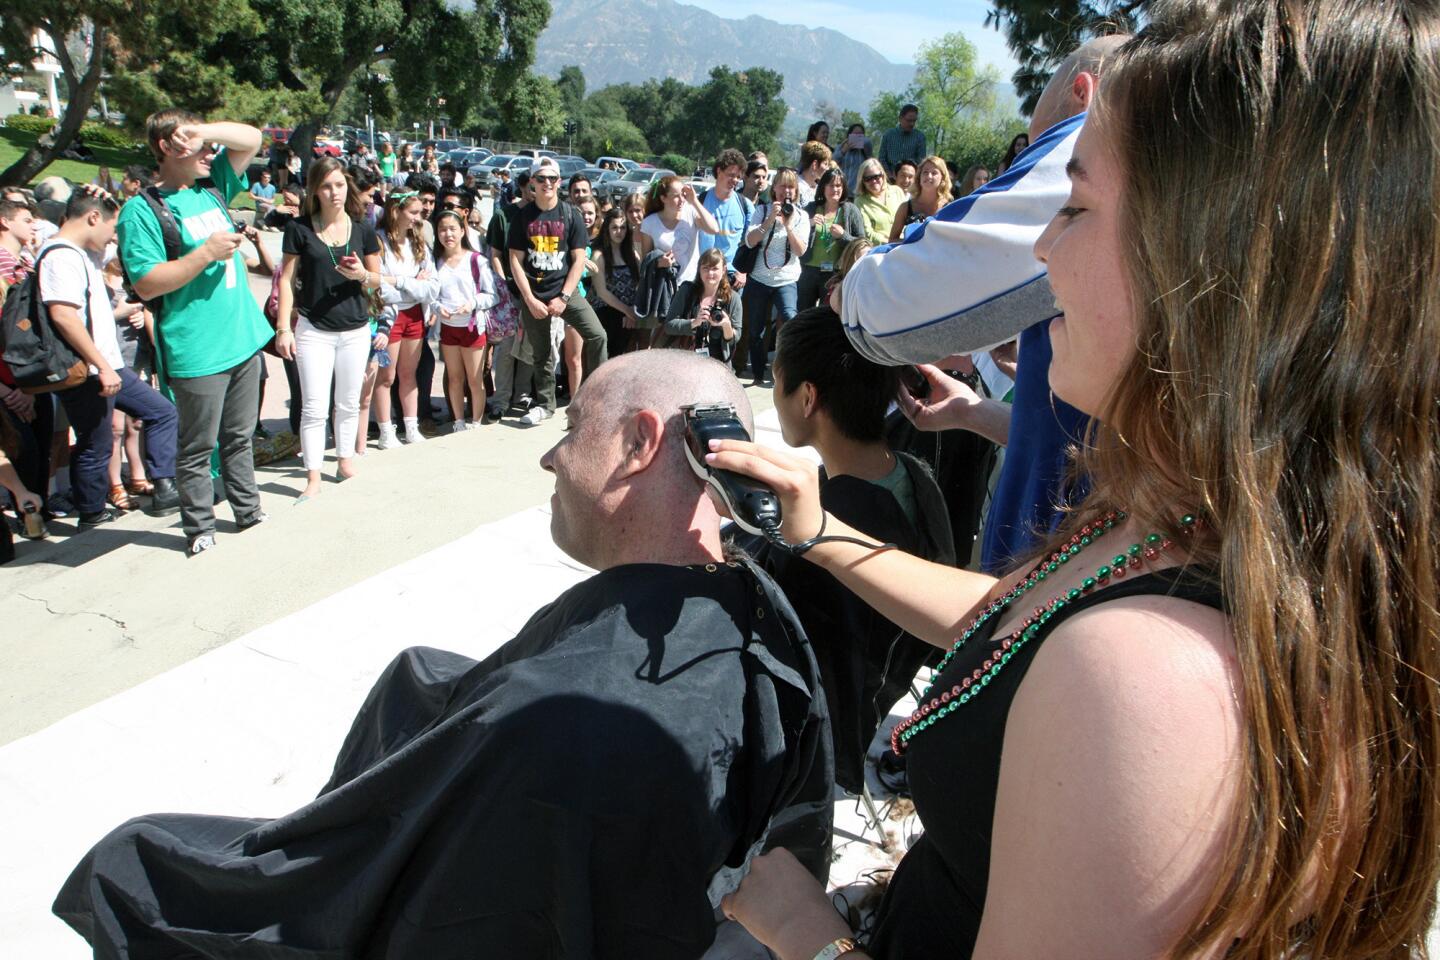 Photo Gallery: Hair loss for a cause